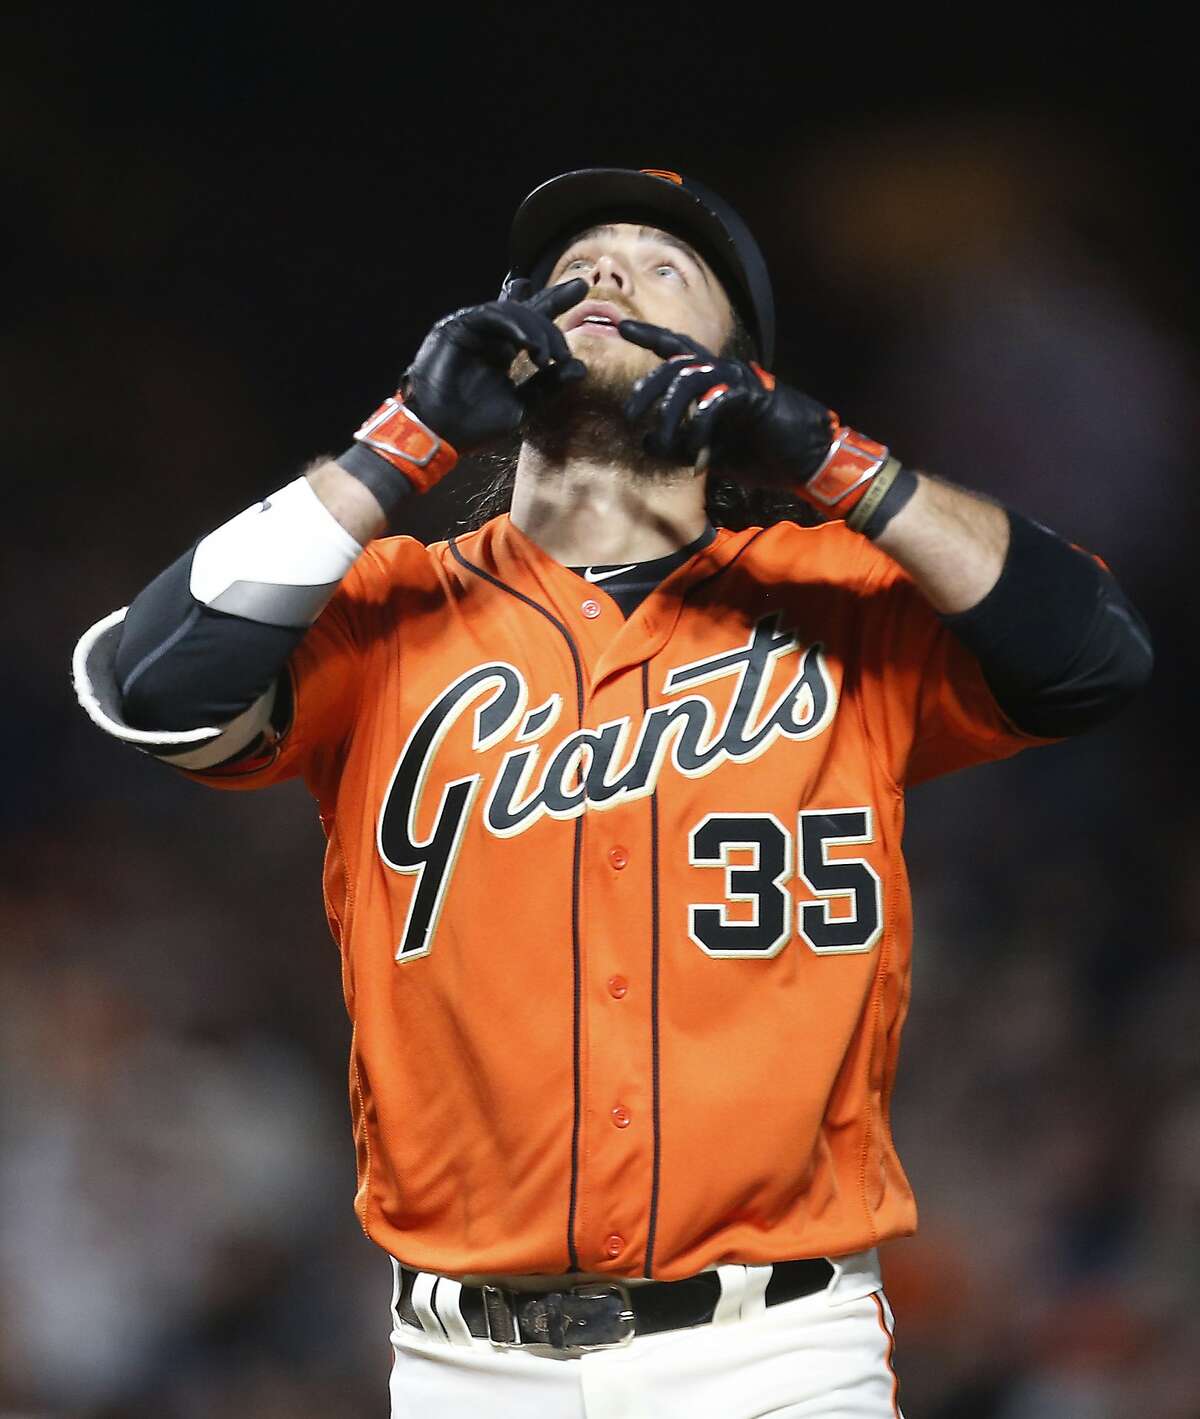 San Francisco Giants' Brandon Crawford gestures as he crosses home plate after hitting a home run against the Colorado Rockies during the fourth inning of a baseball game, Friday, April 14, 2017, in San Francisco. (AP Photo/Tony Avelar)